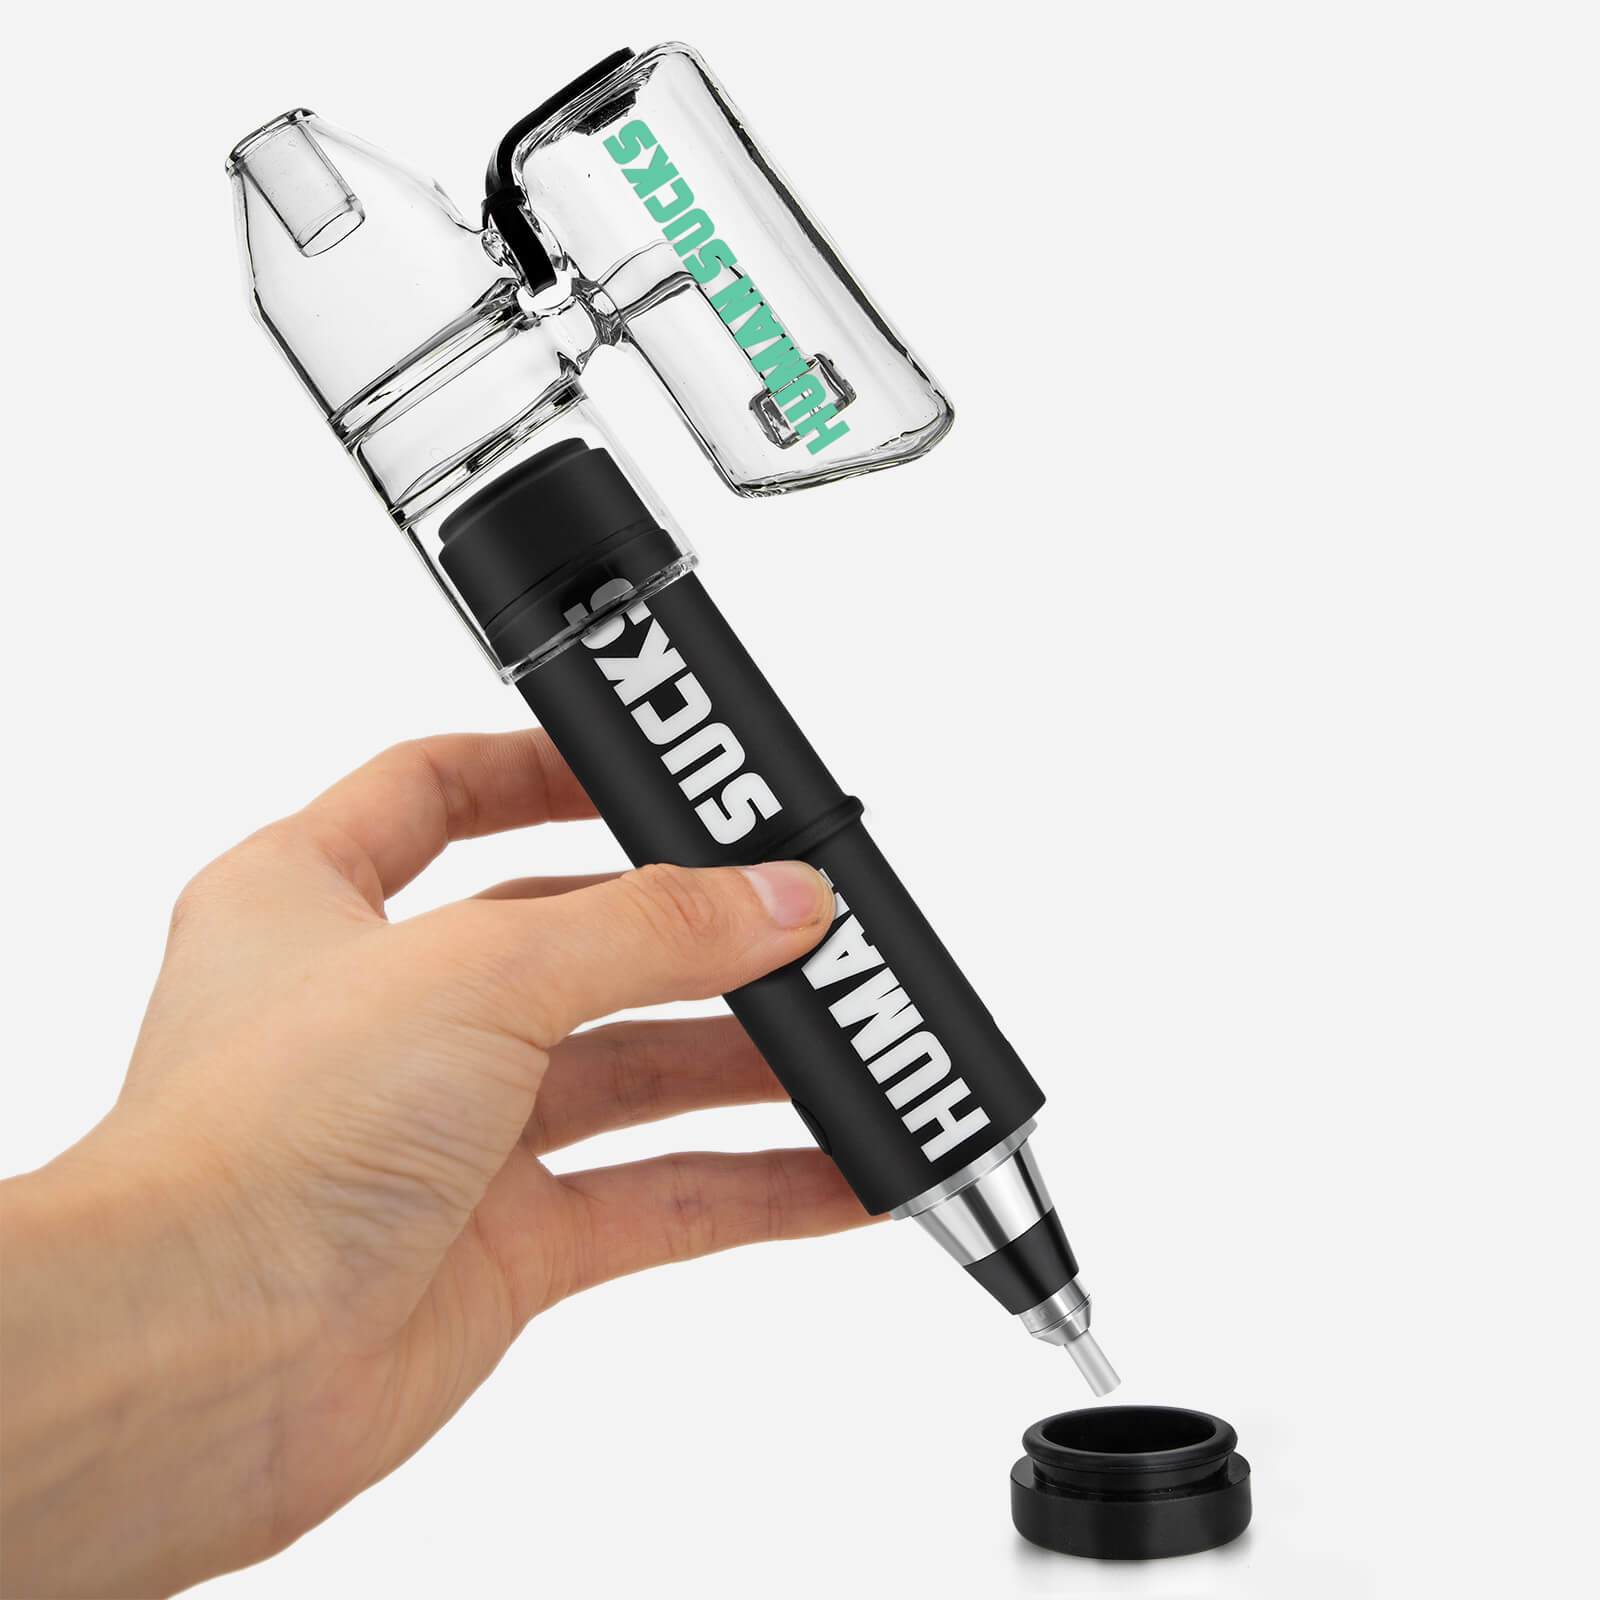 Inhalco Stinger Electric Nectar Collector Kit Product Review Key To